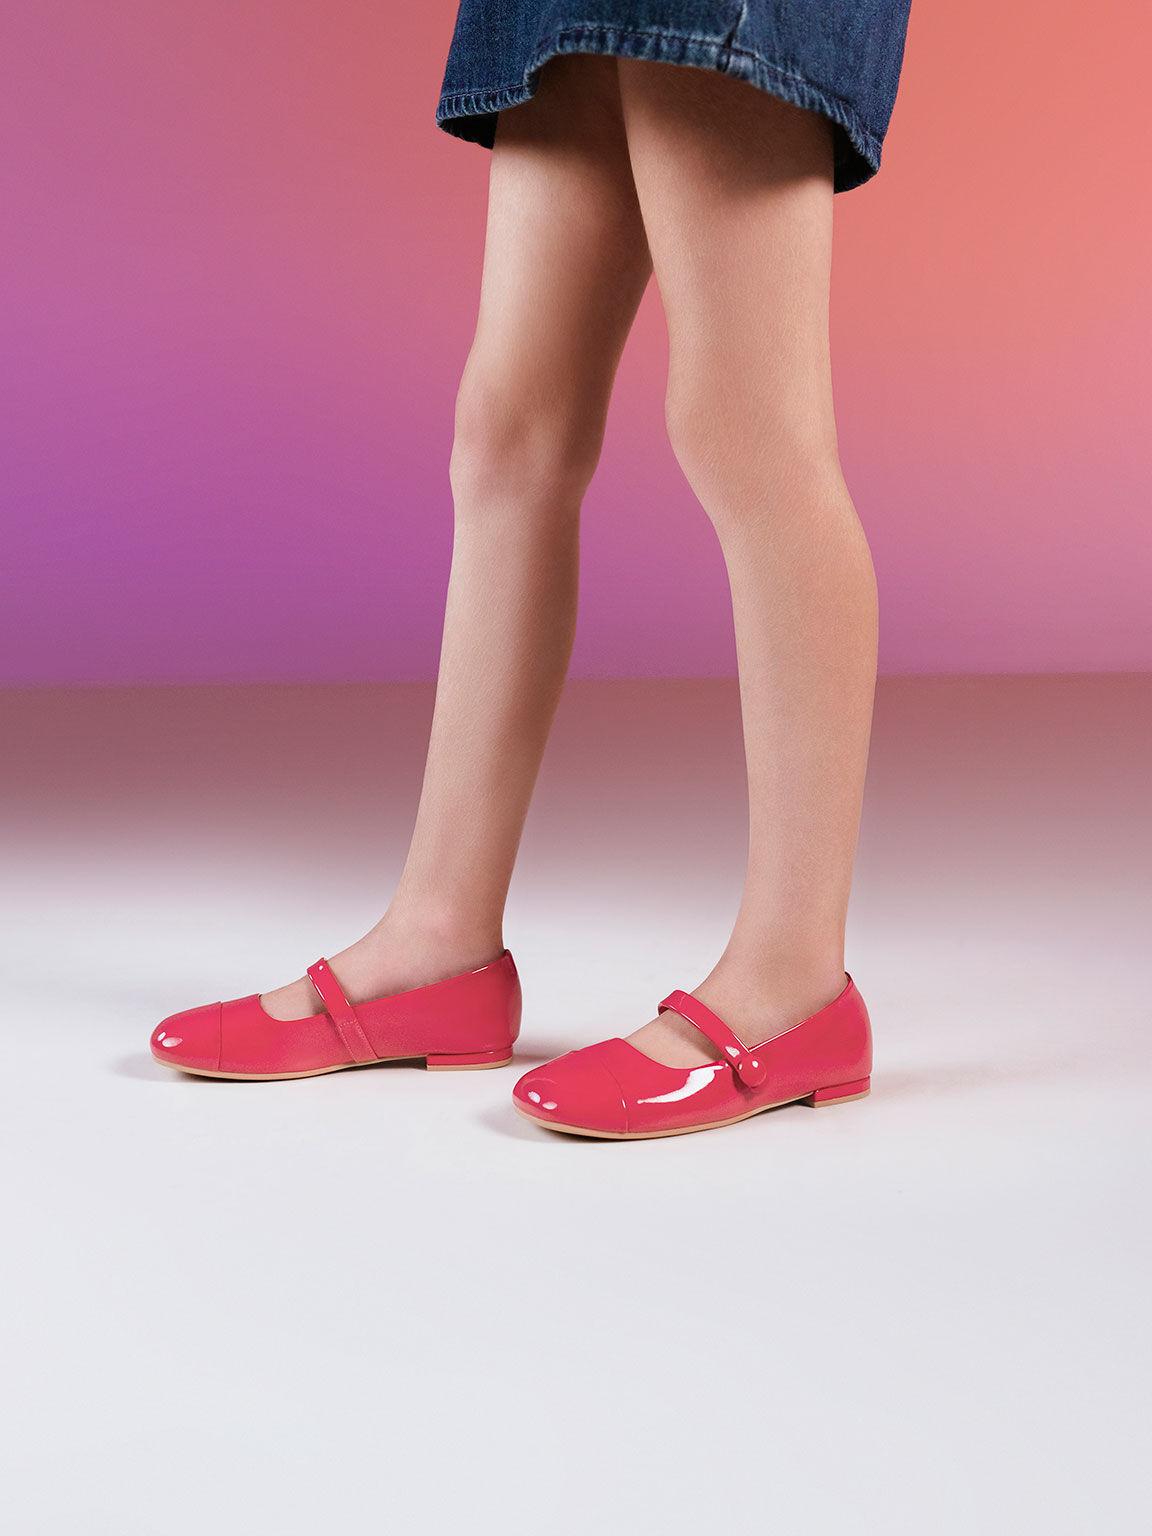 Girls' Patent Mary Jane Flats, Pink, hi-res